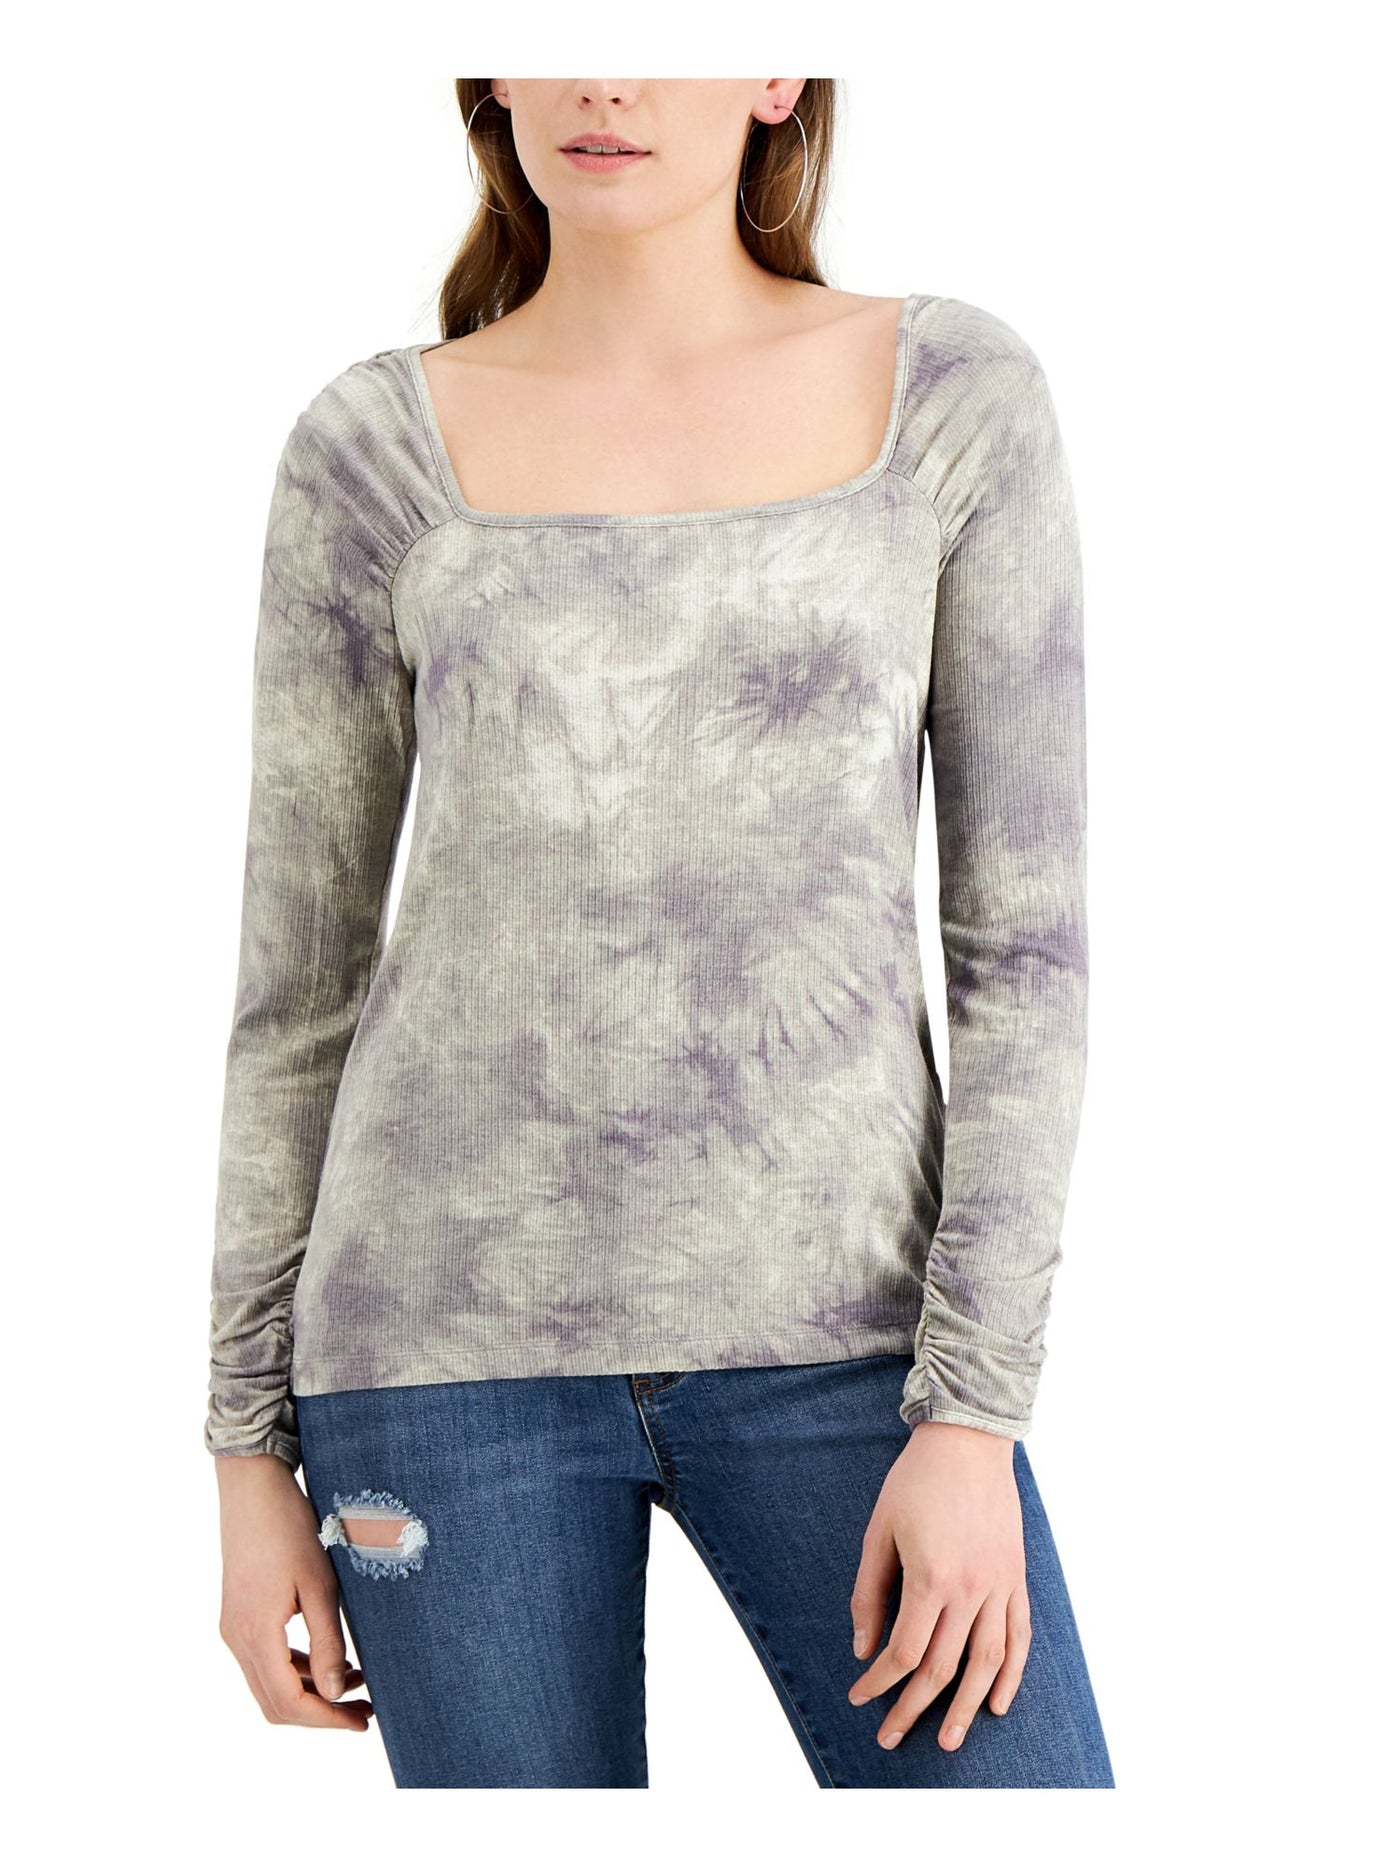 FEVER Womens Gray Tie Dye Long Sleeve Square Neck Top Size: L